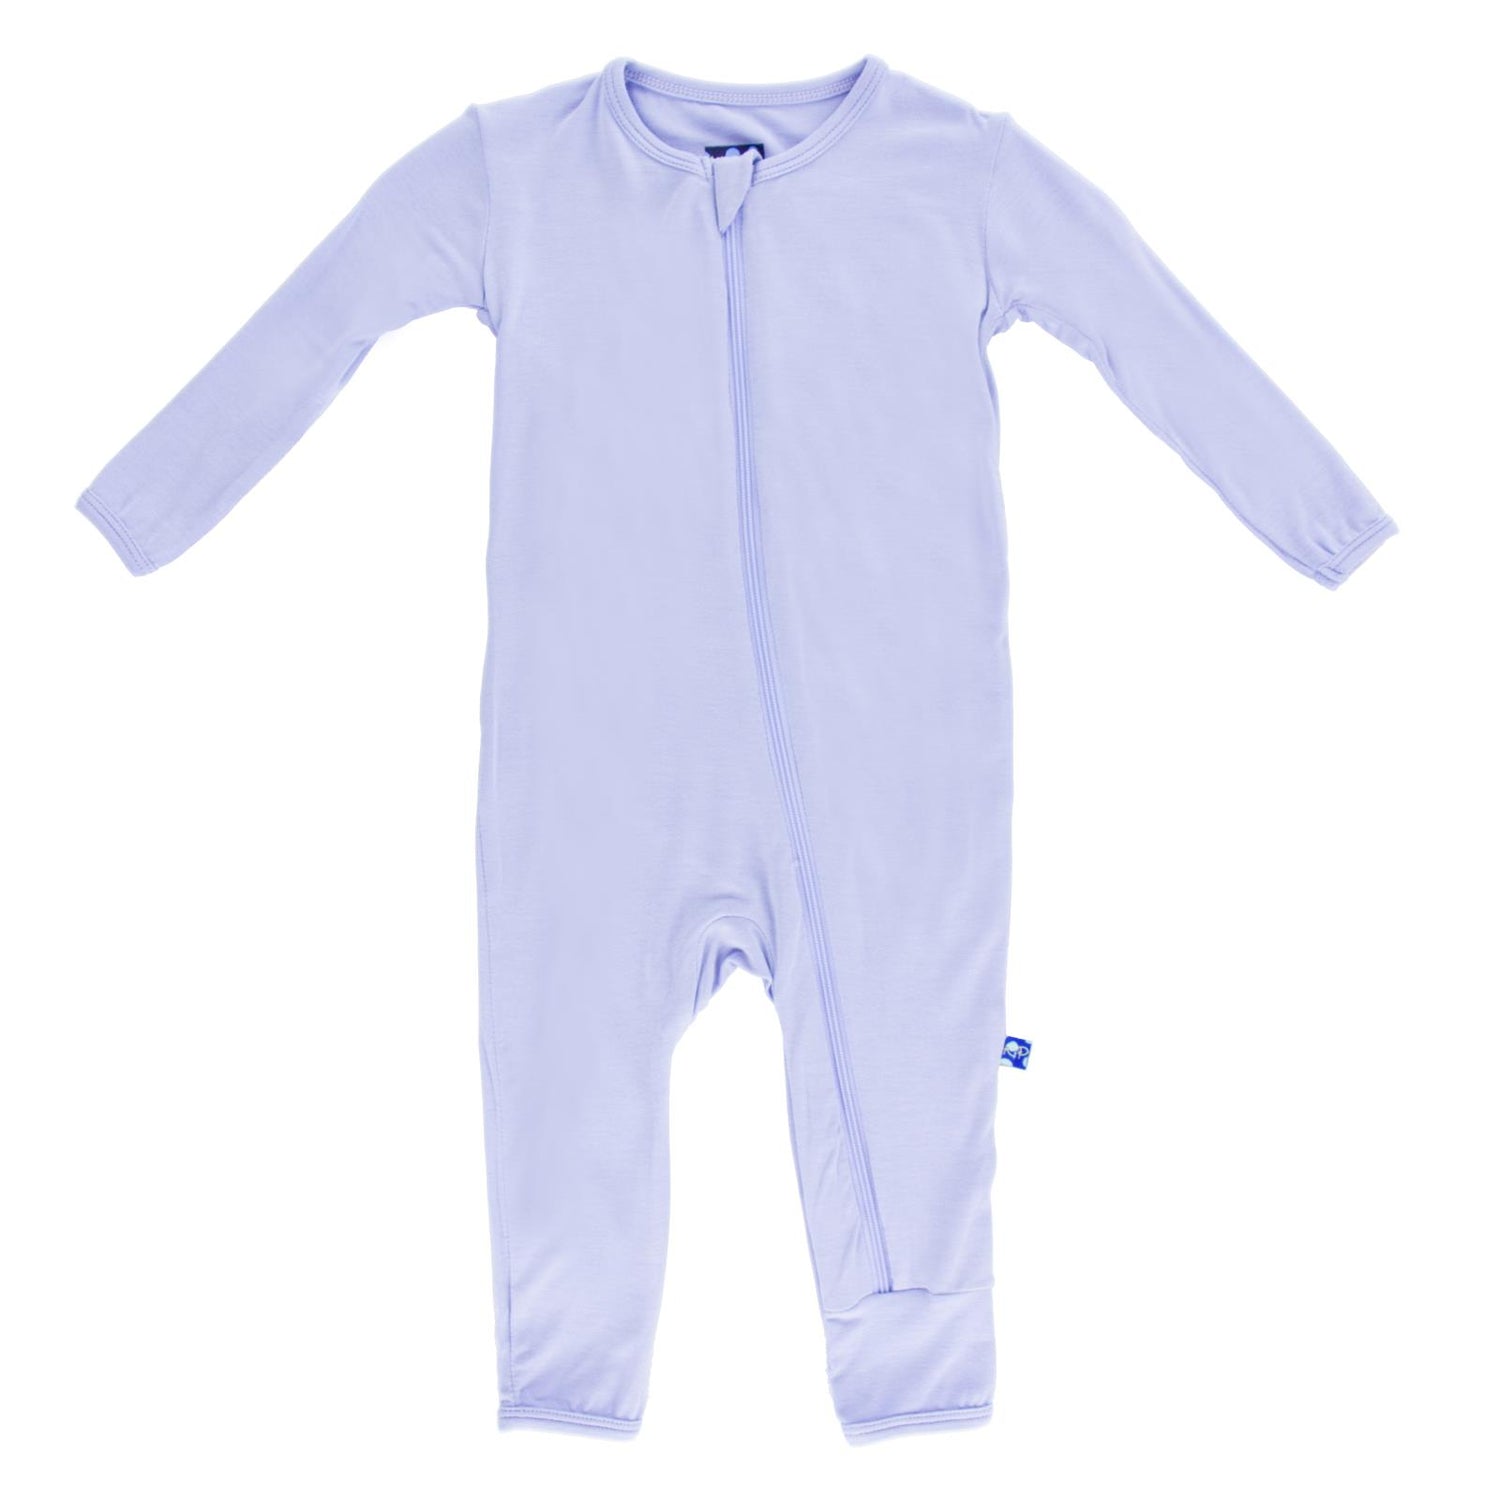 Coverall with Zipper in Lilac